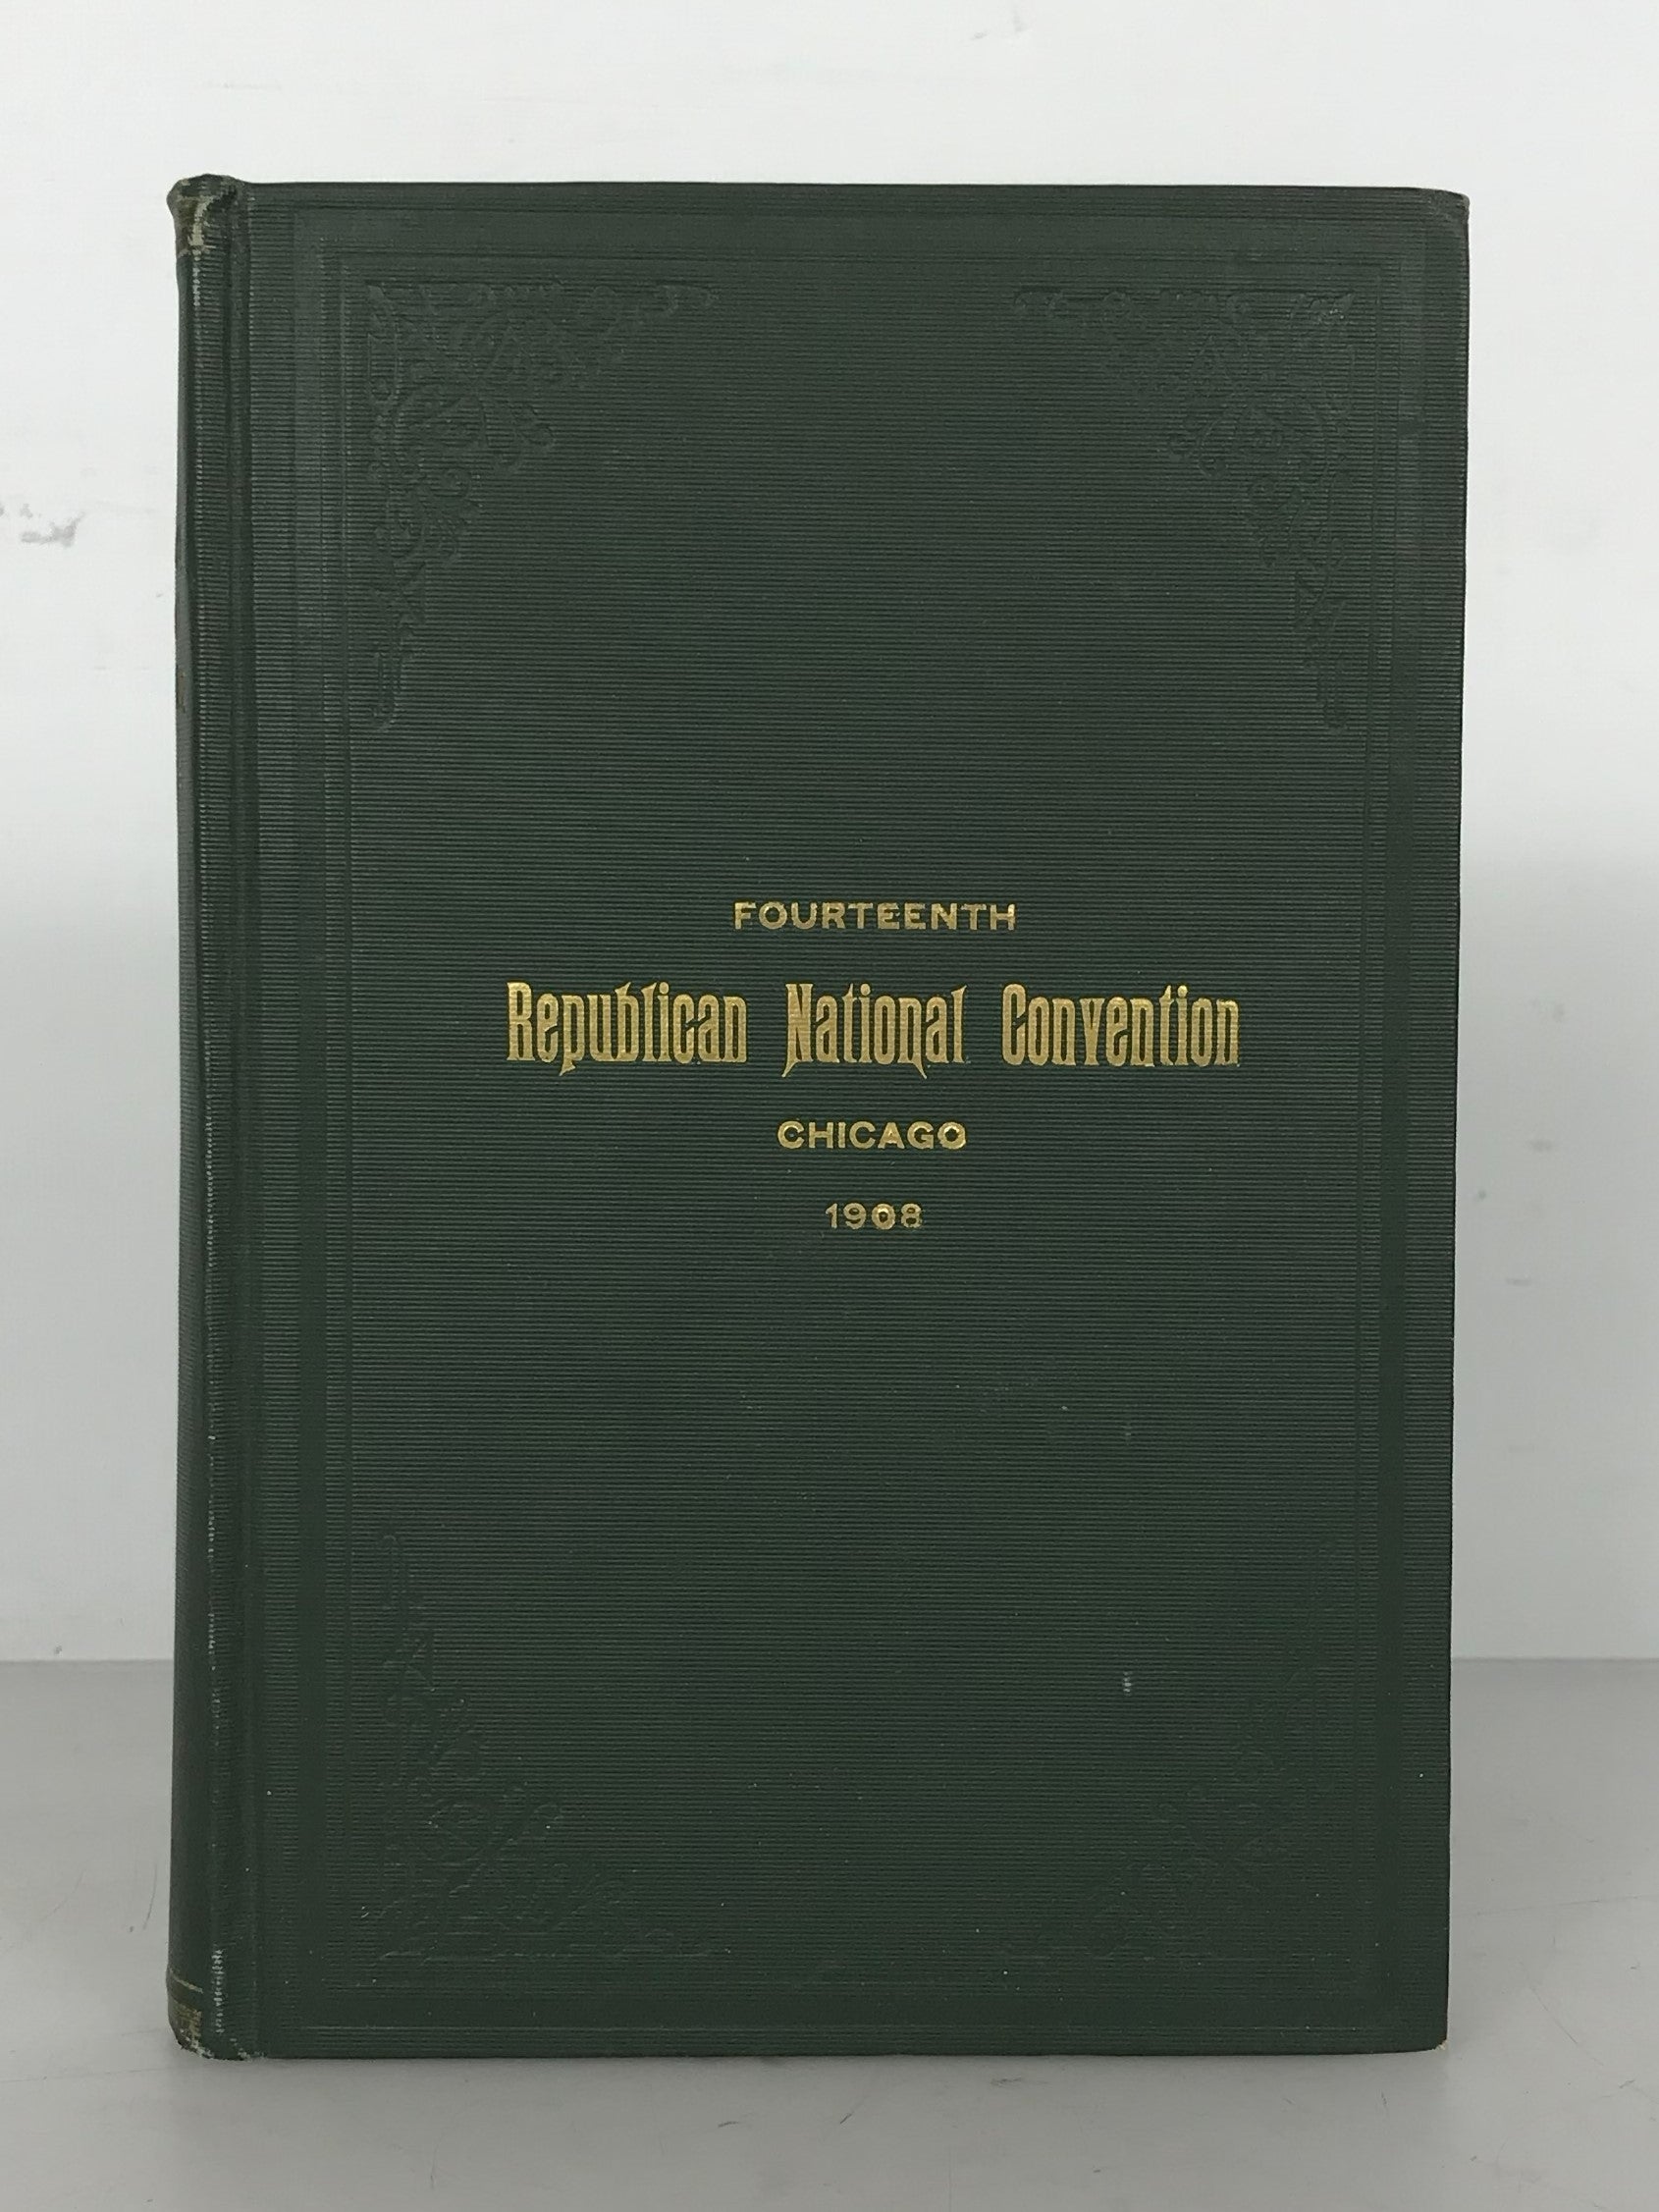 Official Report of the Proceedings of the Fourteenth Republican National Convention 1908